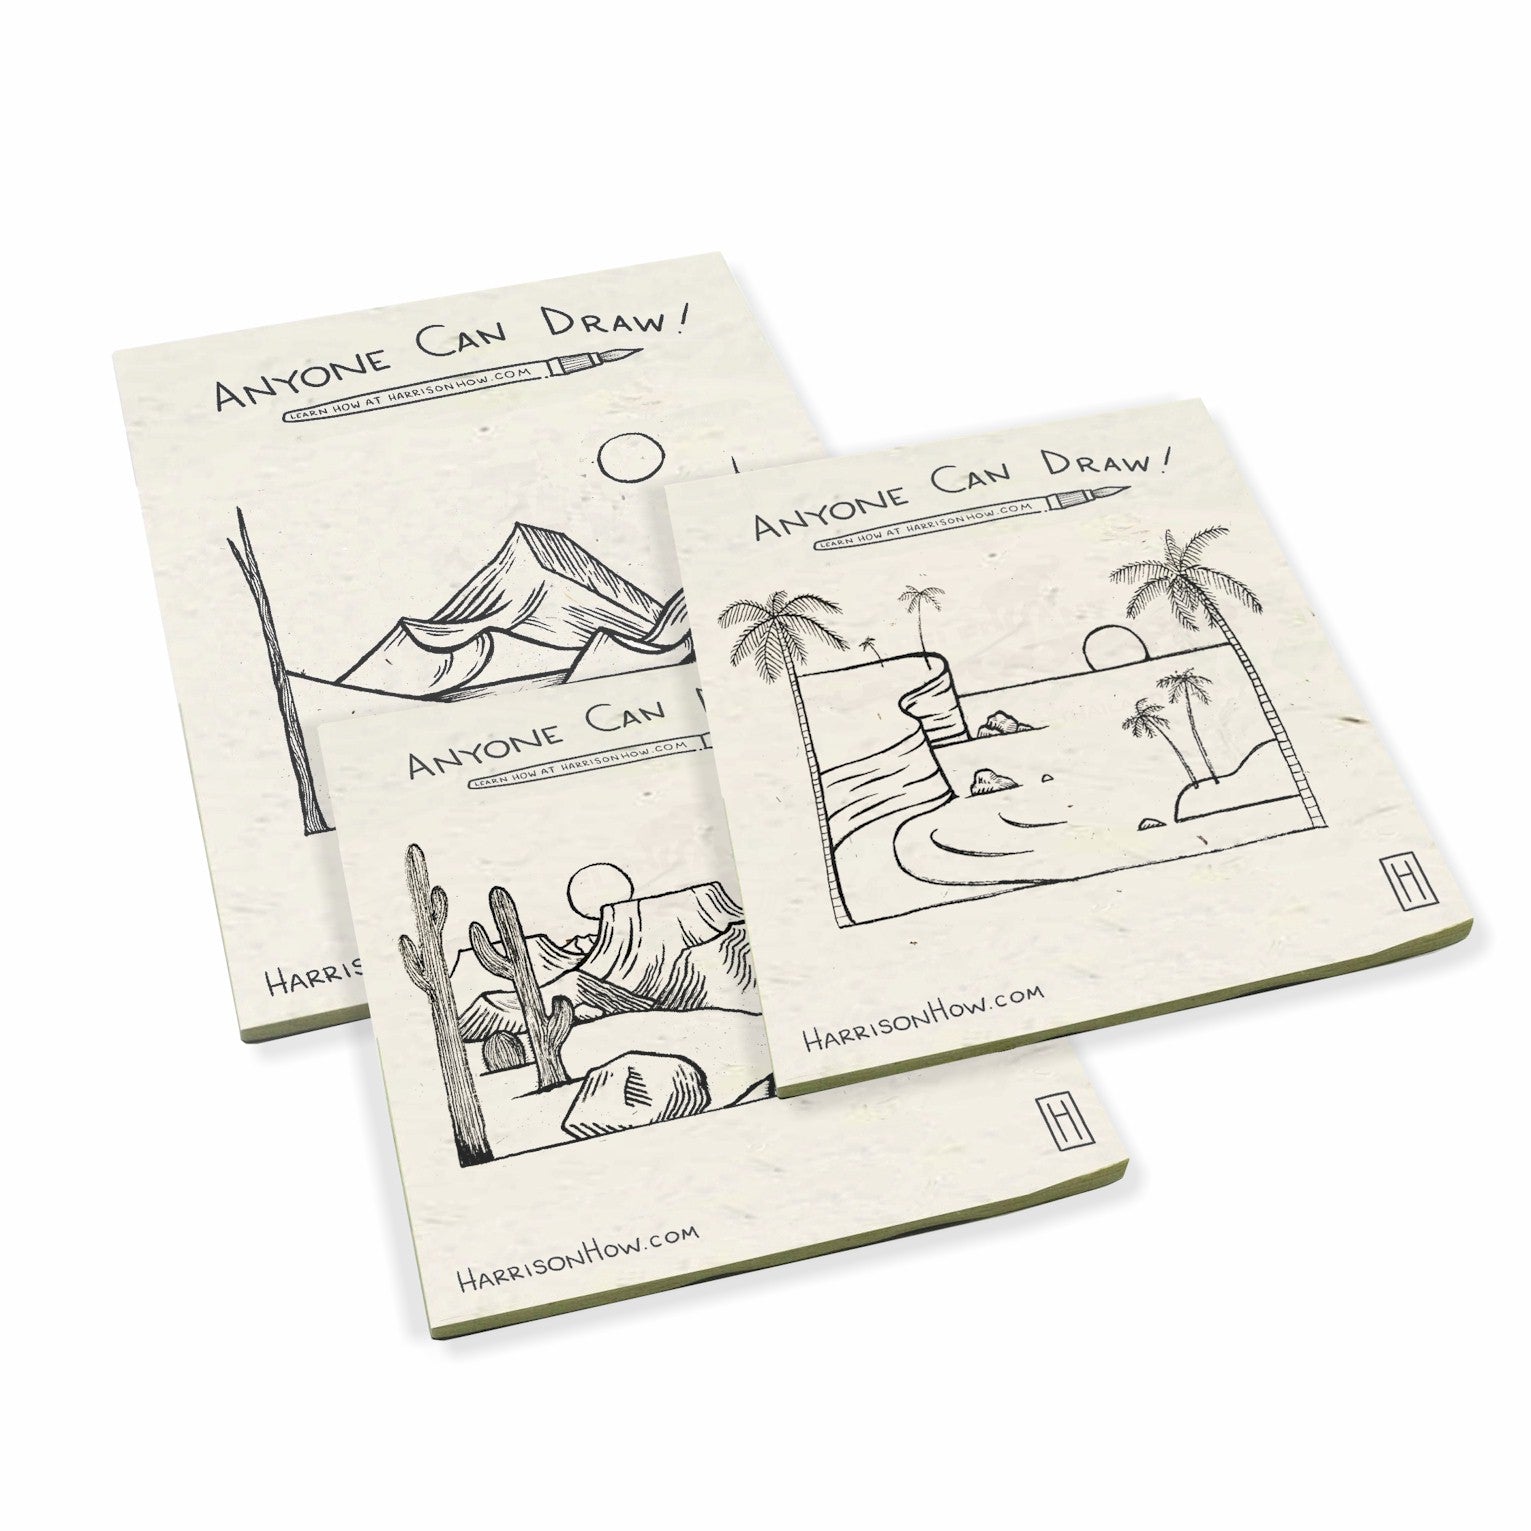 Harrison How - Anyone Can Draw! Artist's Large Drawing Pads Set on